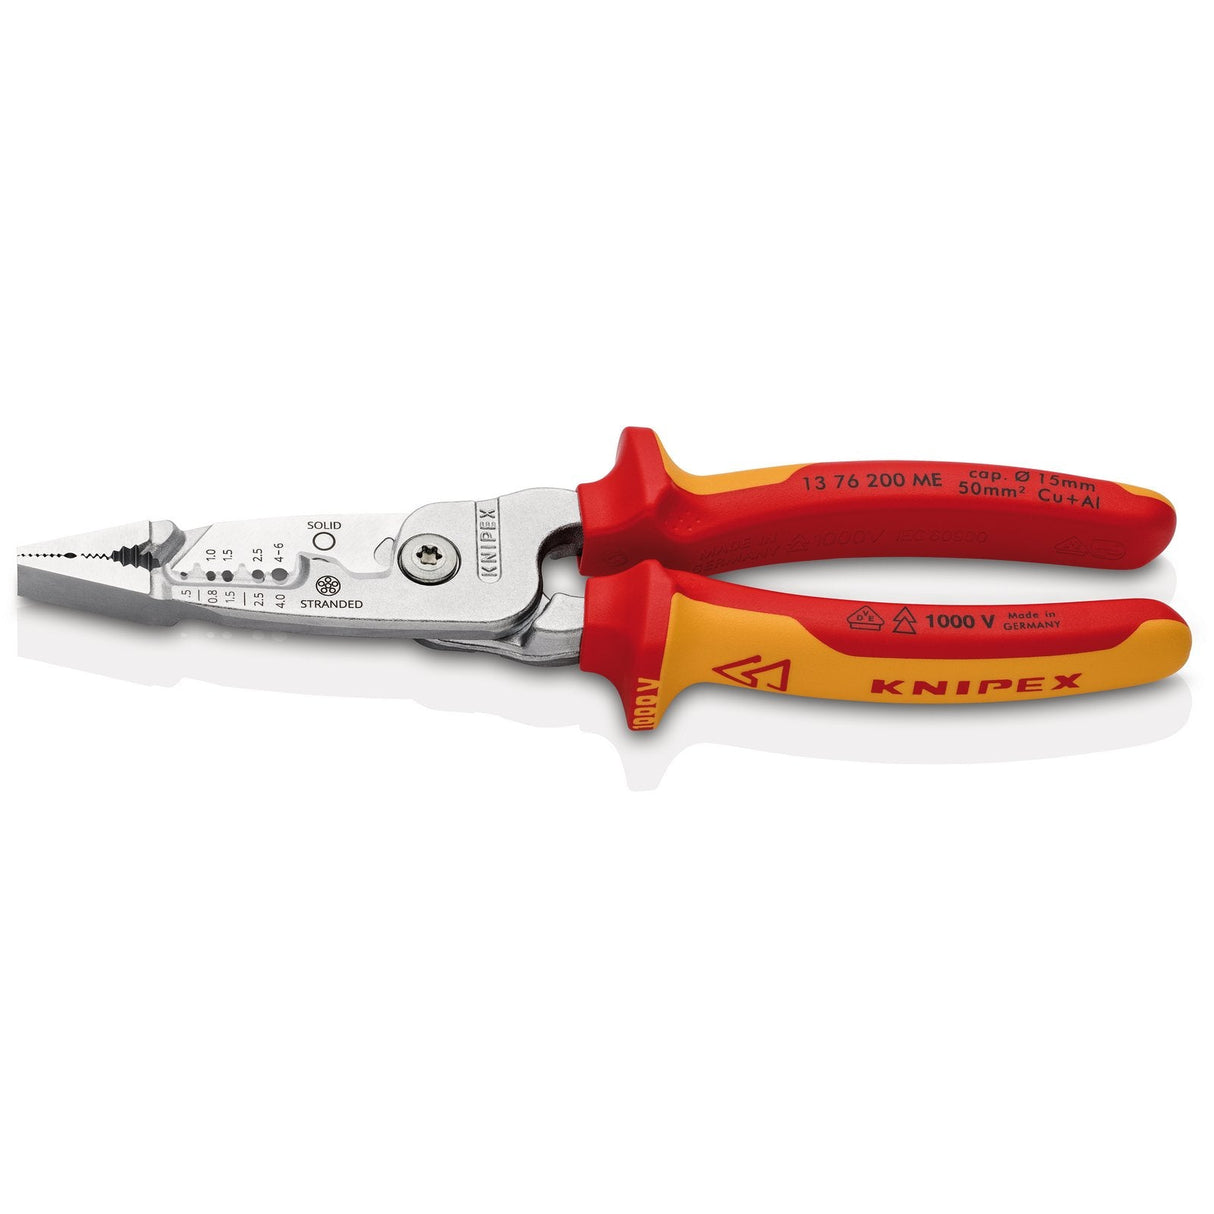 Draper Knipex 13 76 200 Me Wire Stripper Metric Version Insulated With Multi-Component Grips, Vde-Tested Chrome-Plated 200mm - 13 76 200 ME - Farming Parts